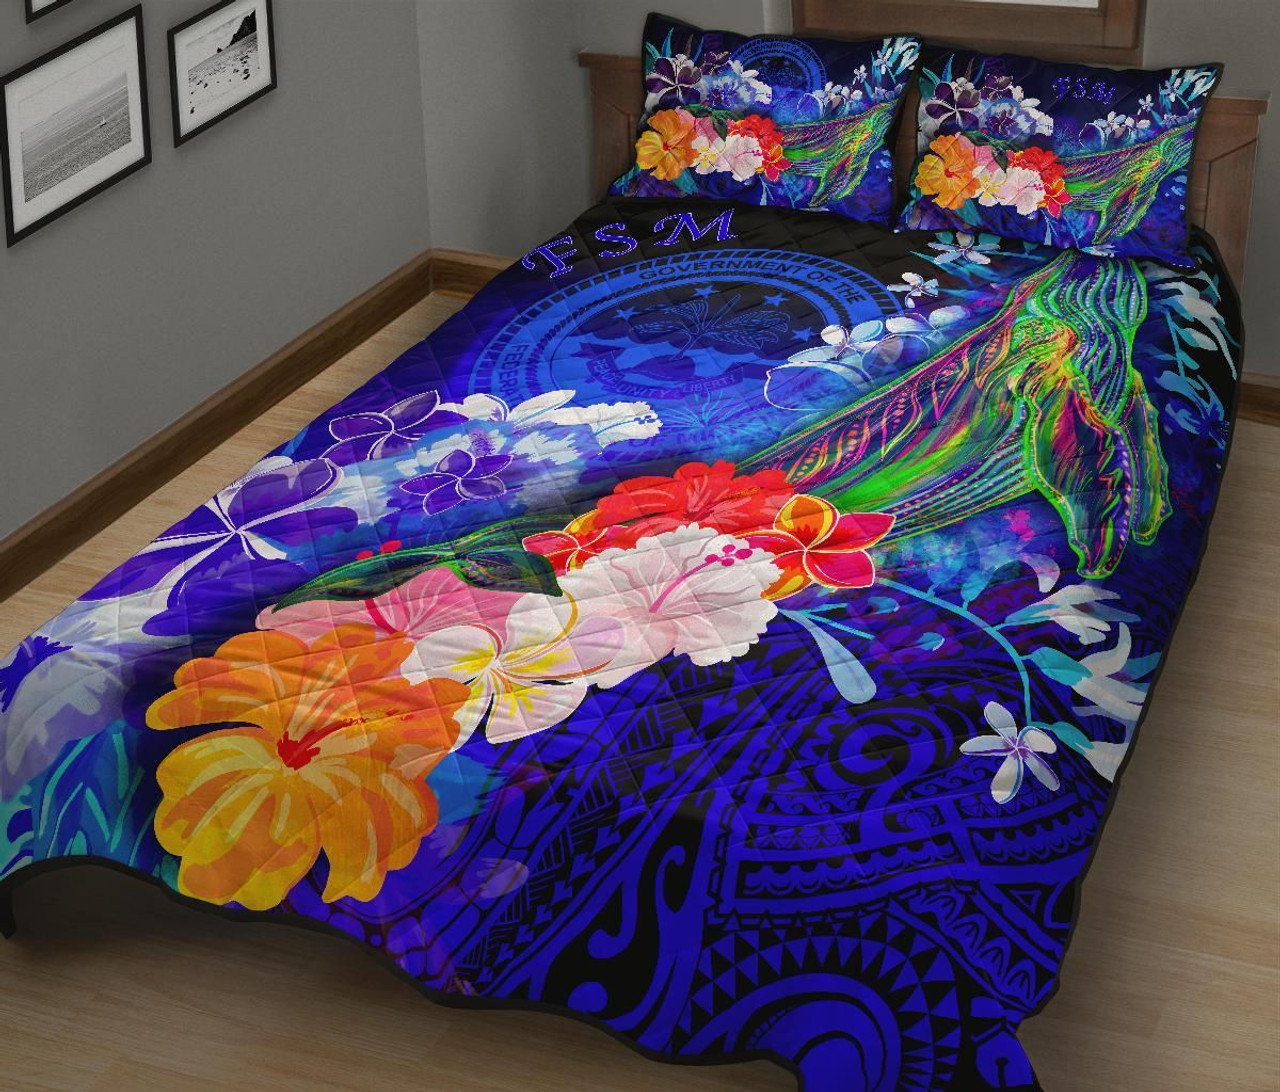 Federated States of Micronesia Quilt Bed Set - Humpback Whale with Tropical Flowers (Blue) 2